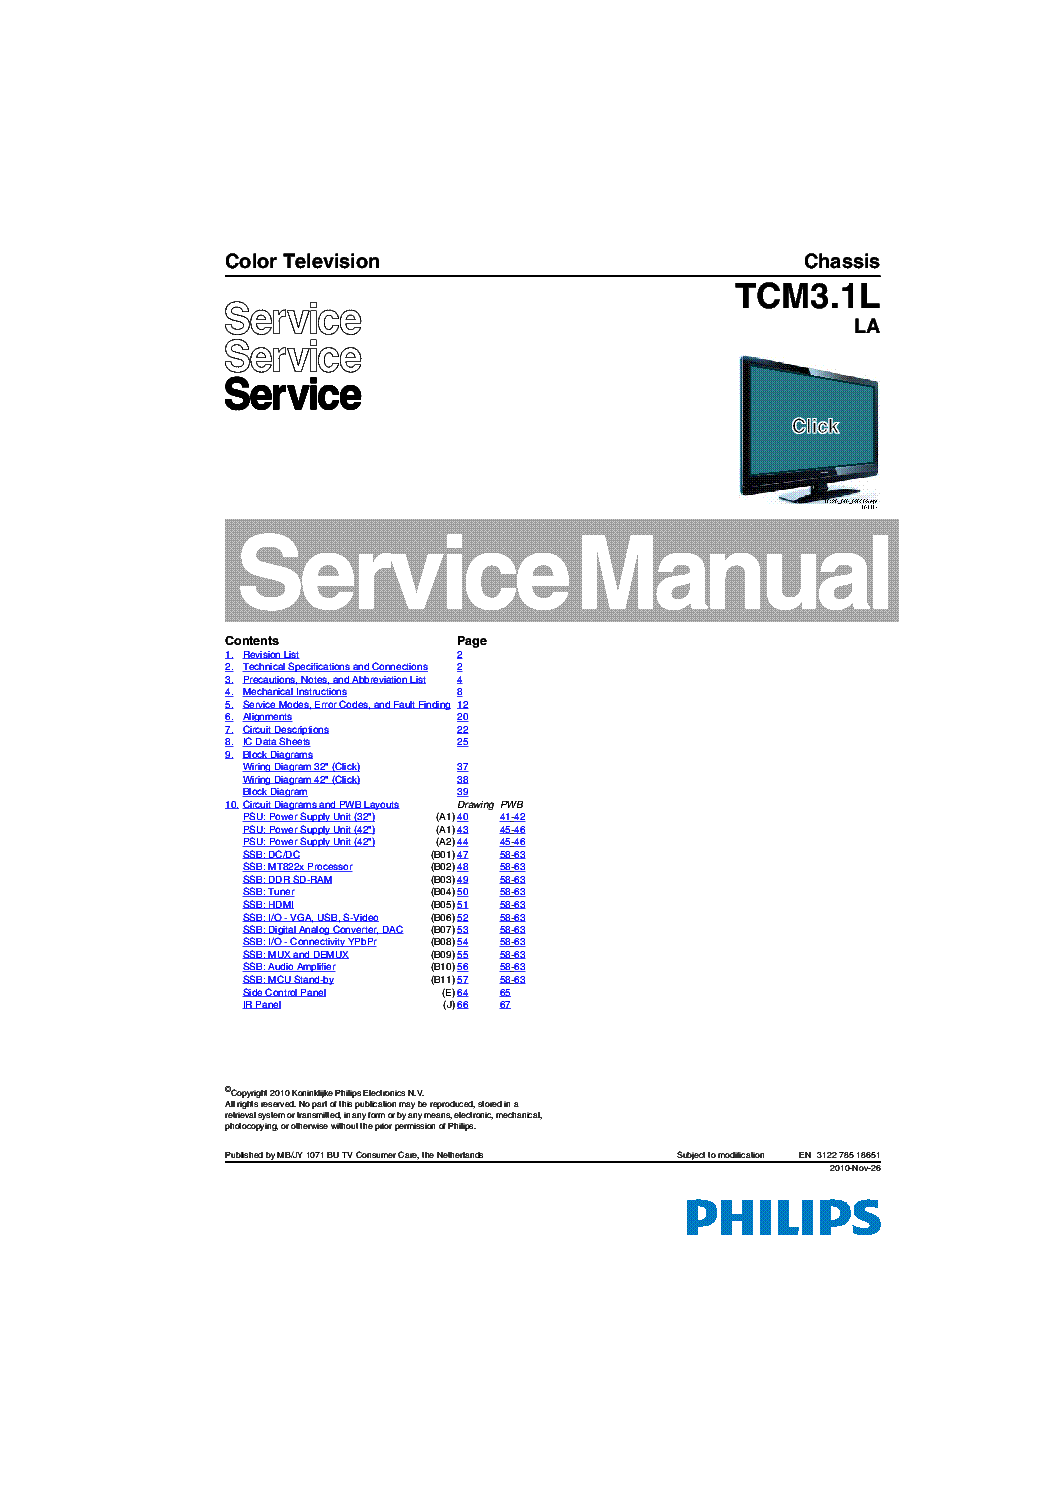 PHILIPS TCM3.1LLA 312278518651 CHASSIS service manual (1st page)